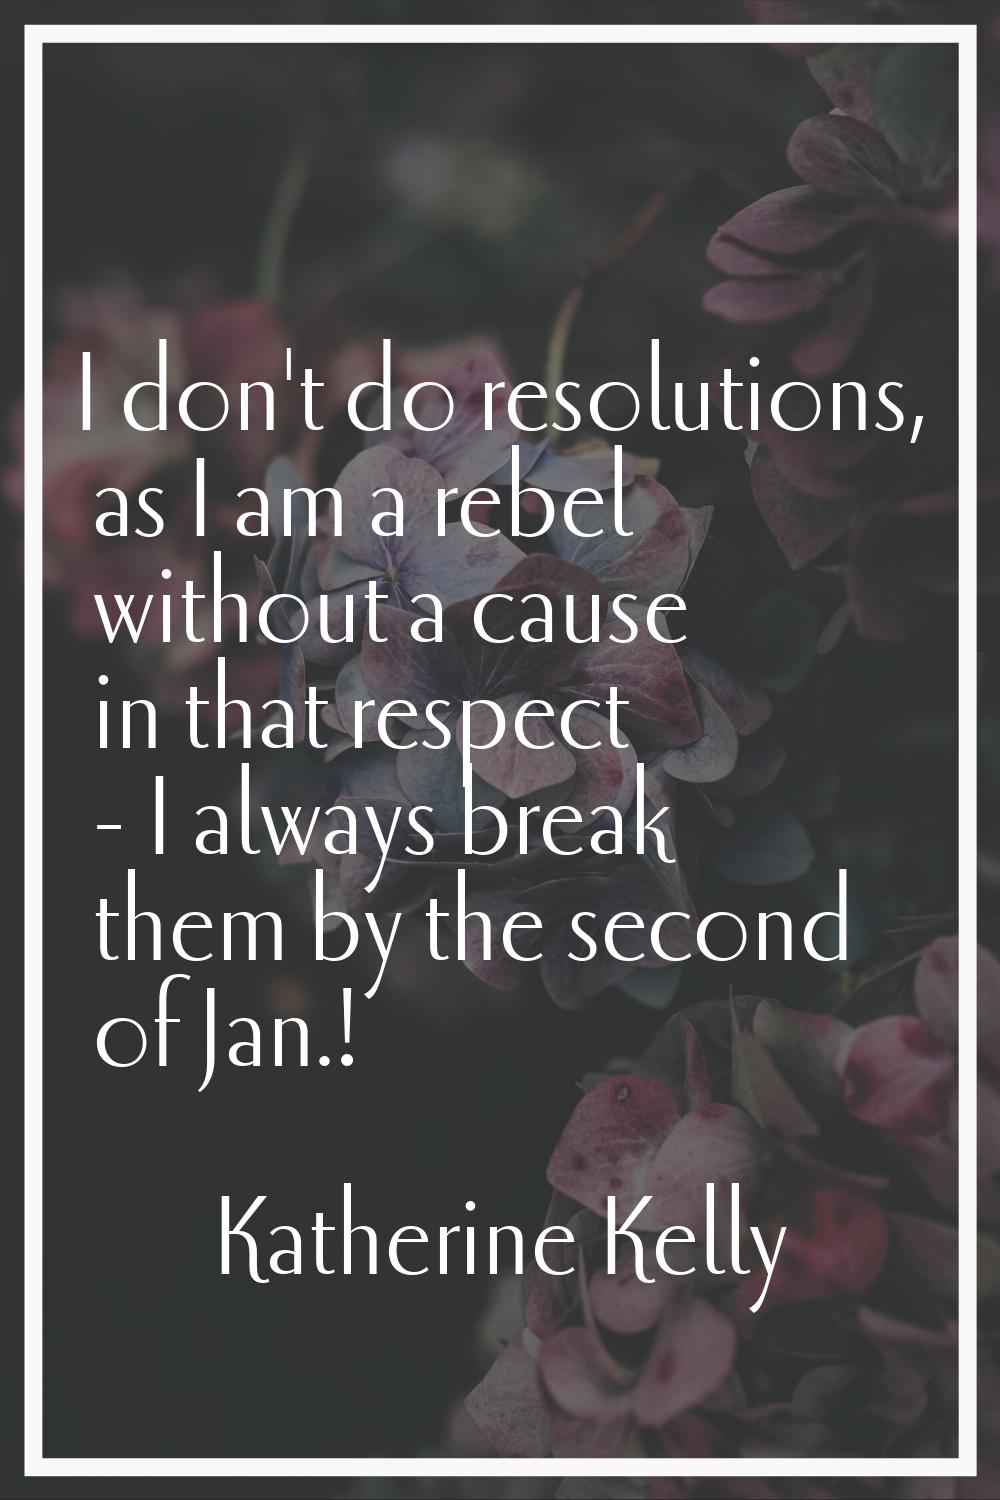 I don't do resolutions, as I am a rebel without a cause in that respect - I always break them by th